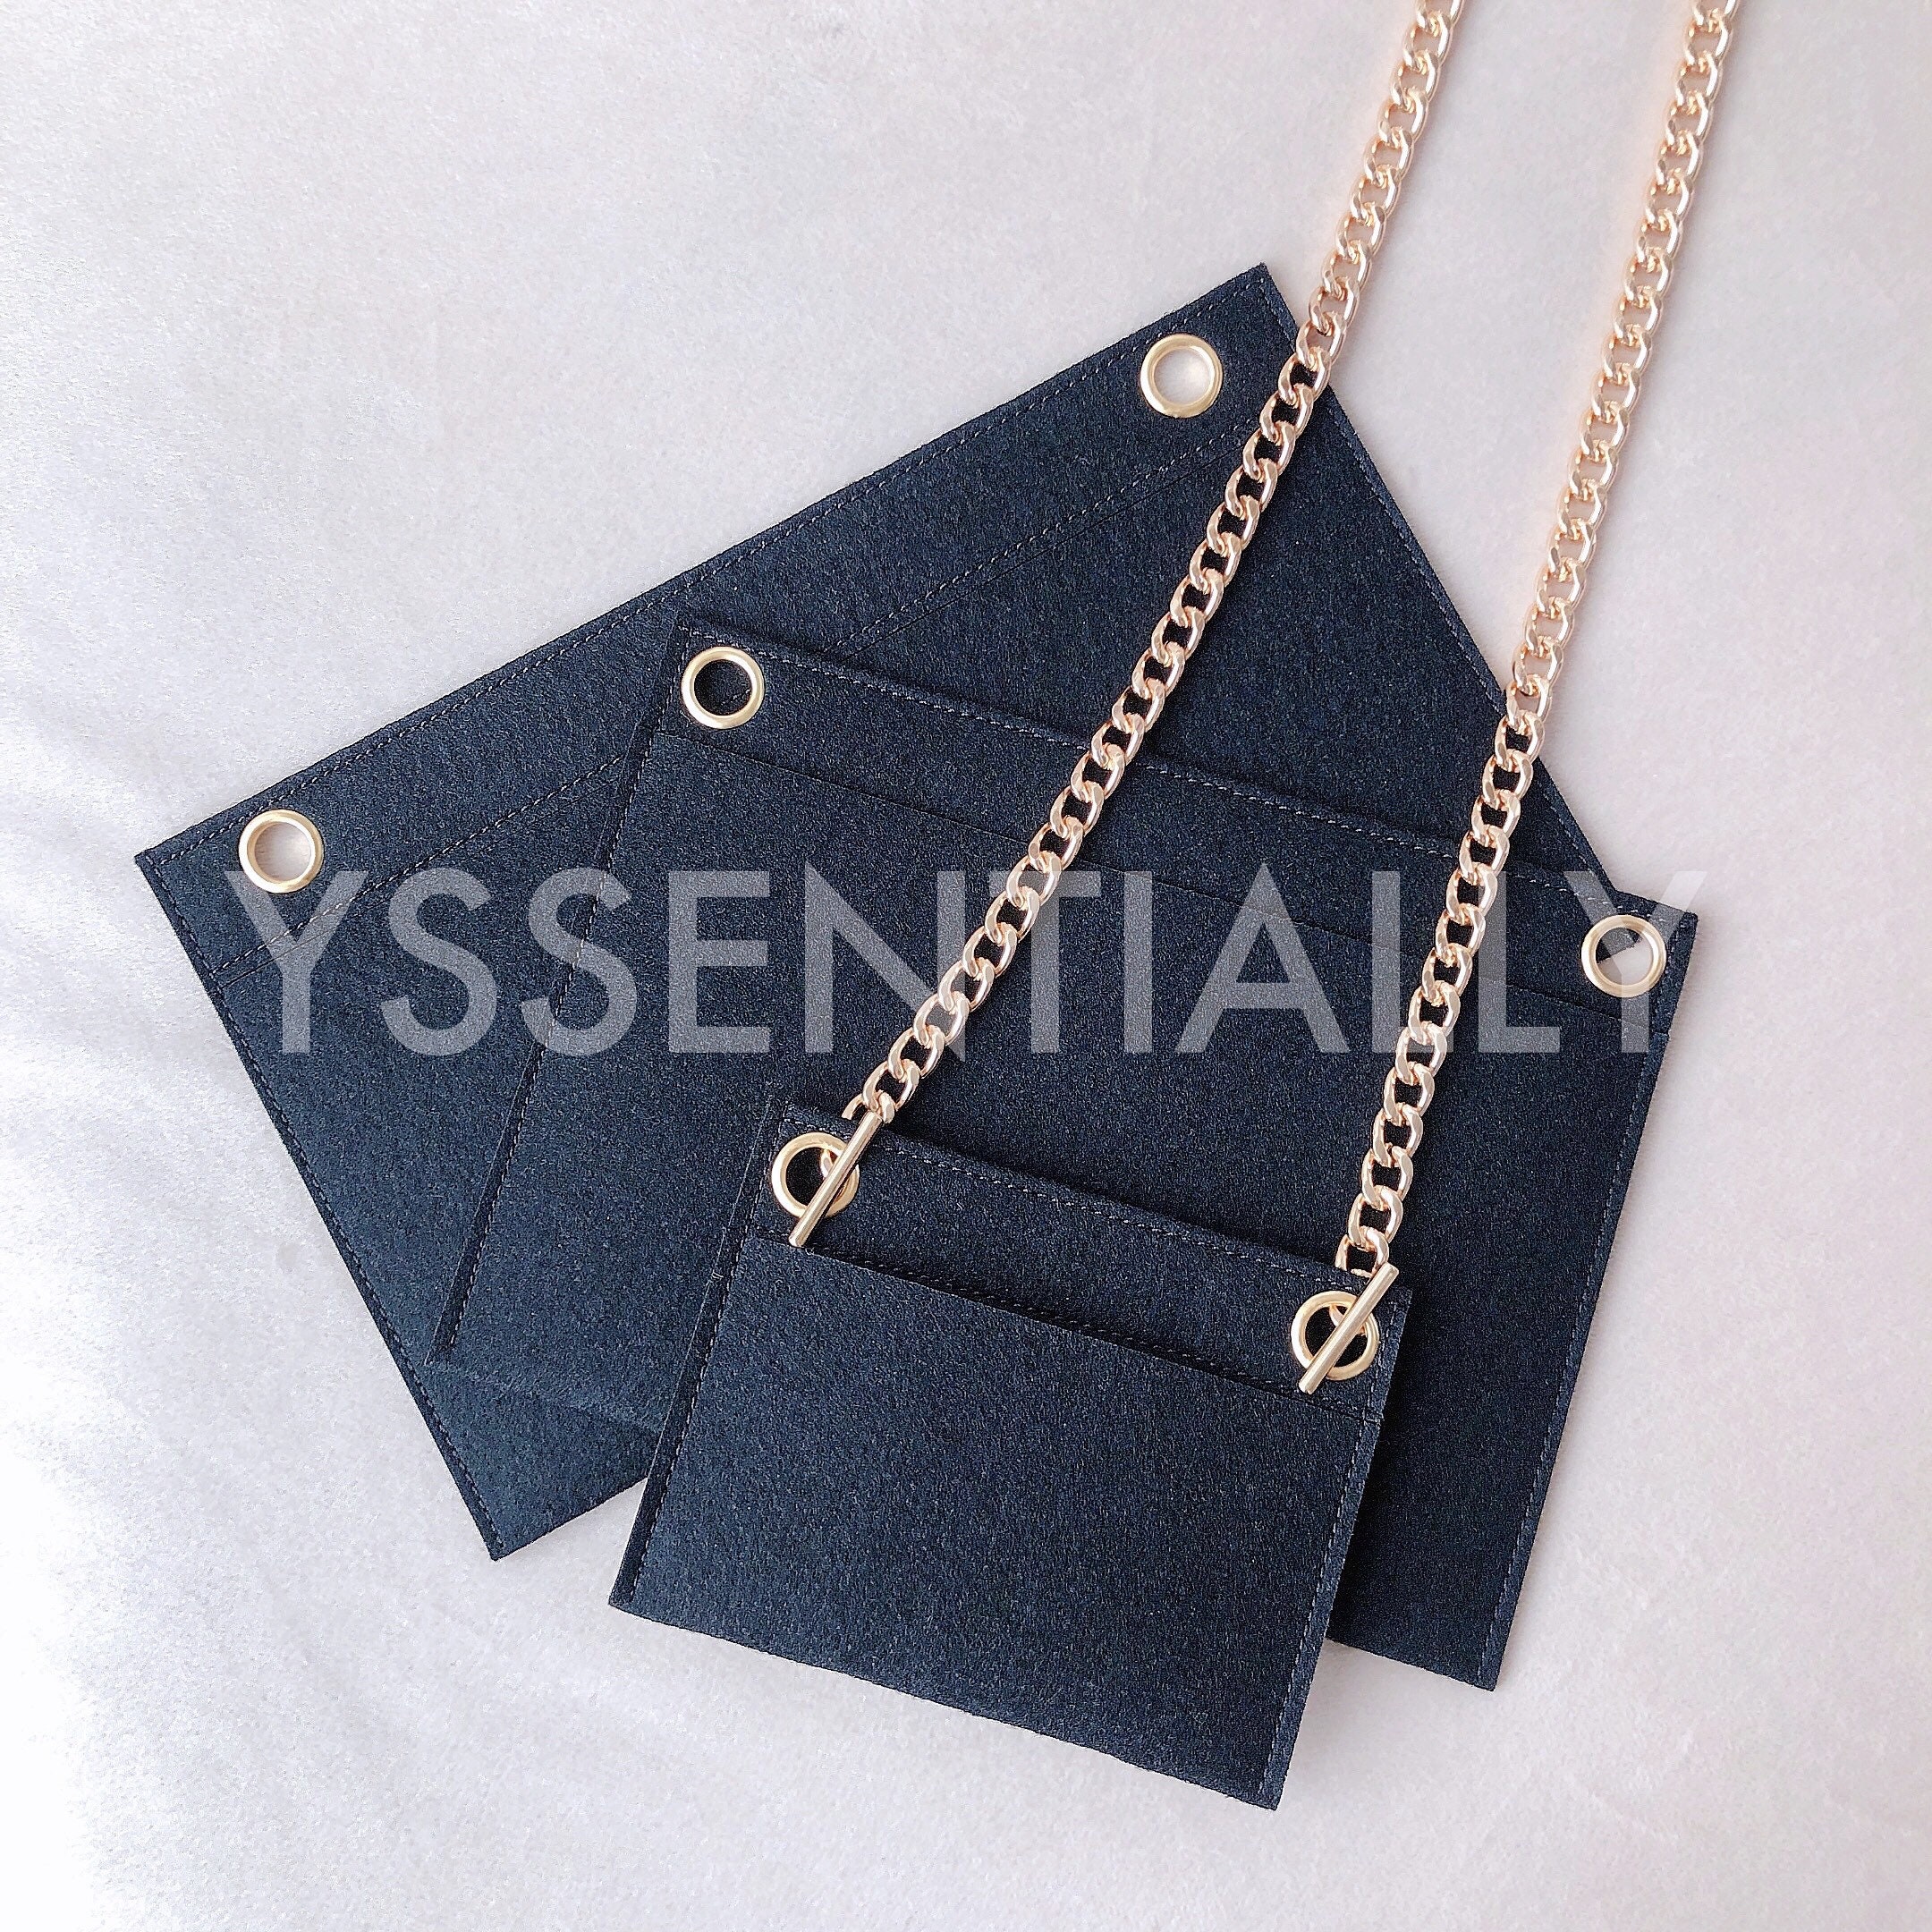 YSL Uptown Clutch Conversion Kit – FromHER